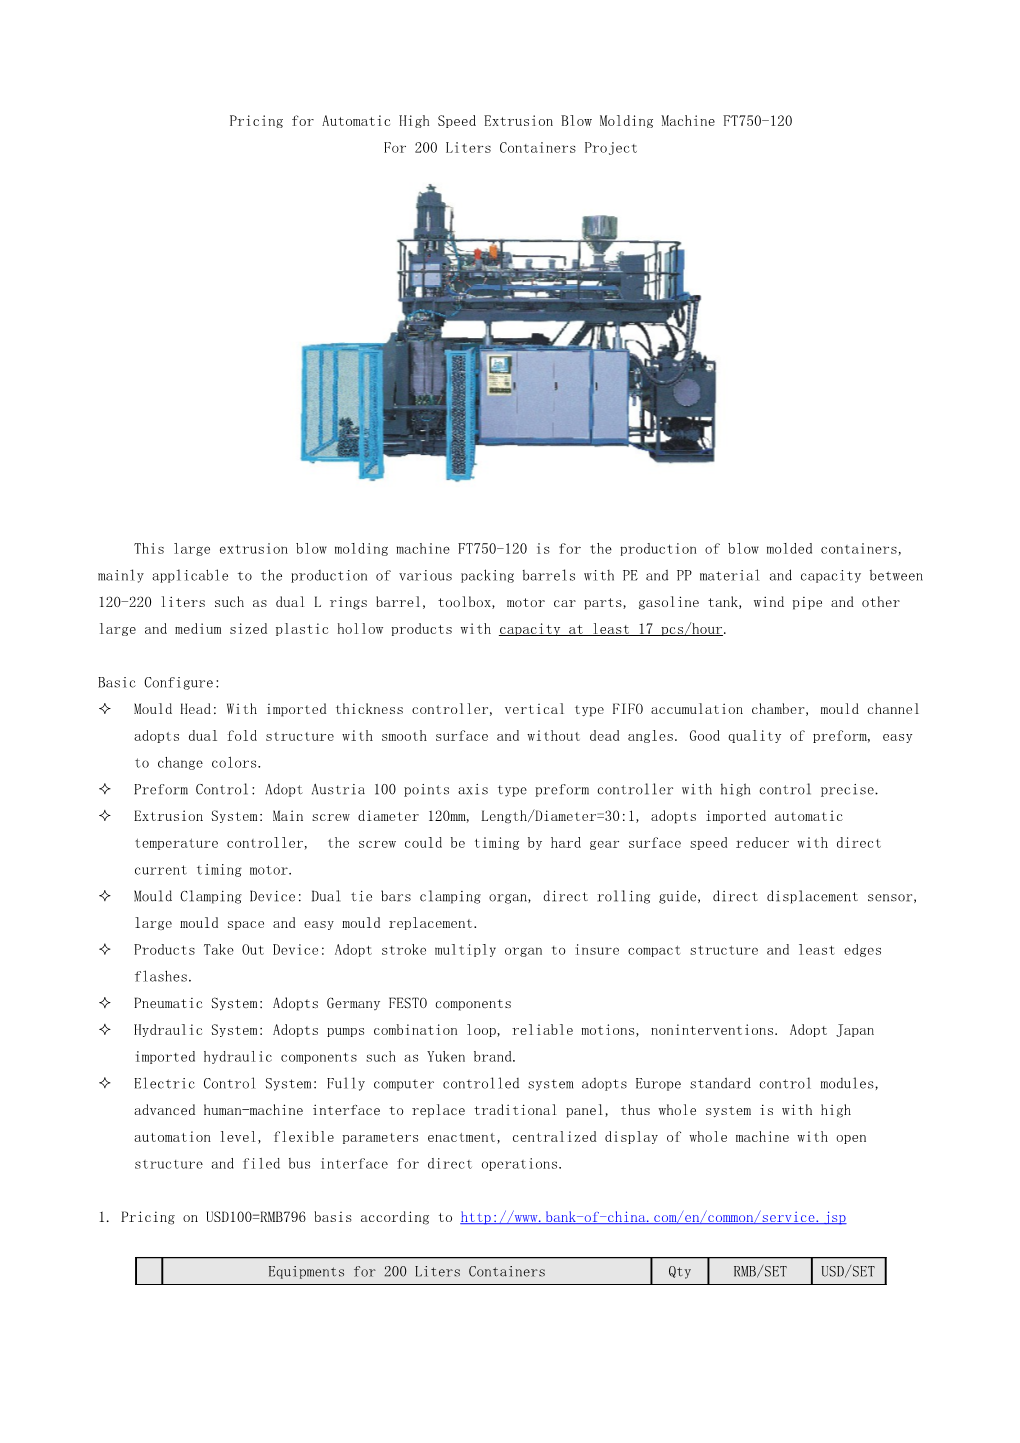 Pricing for Automatic High Speed Extrusion Blow Molding Machine FT750-120